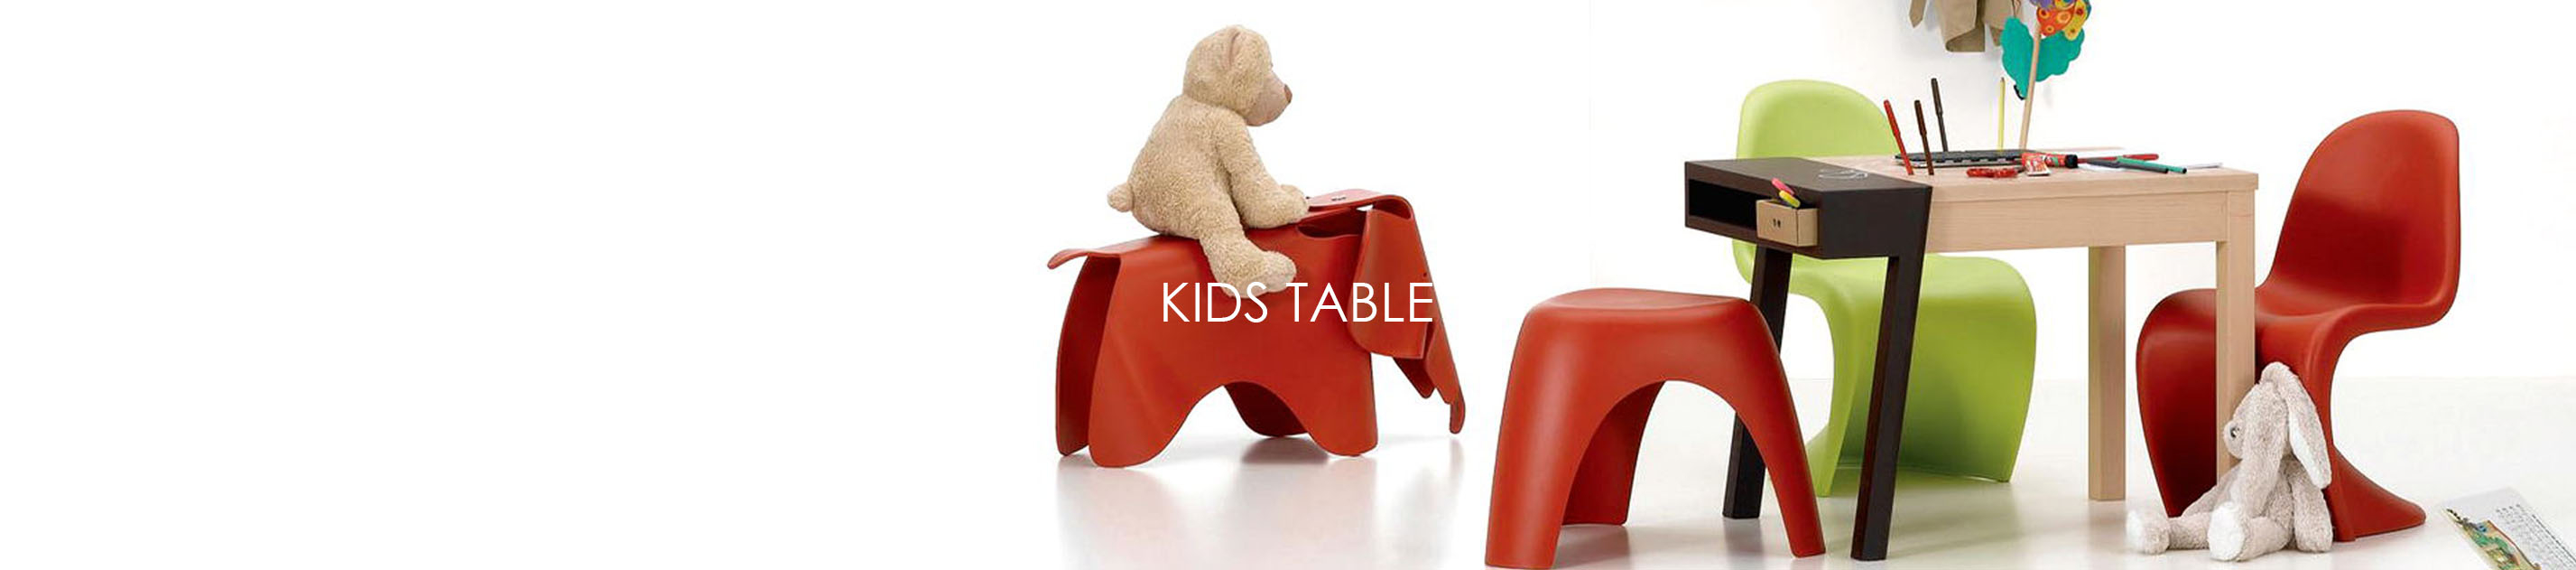 Kid's Tables